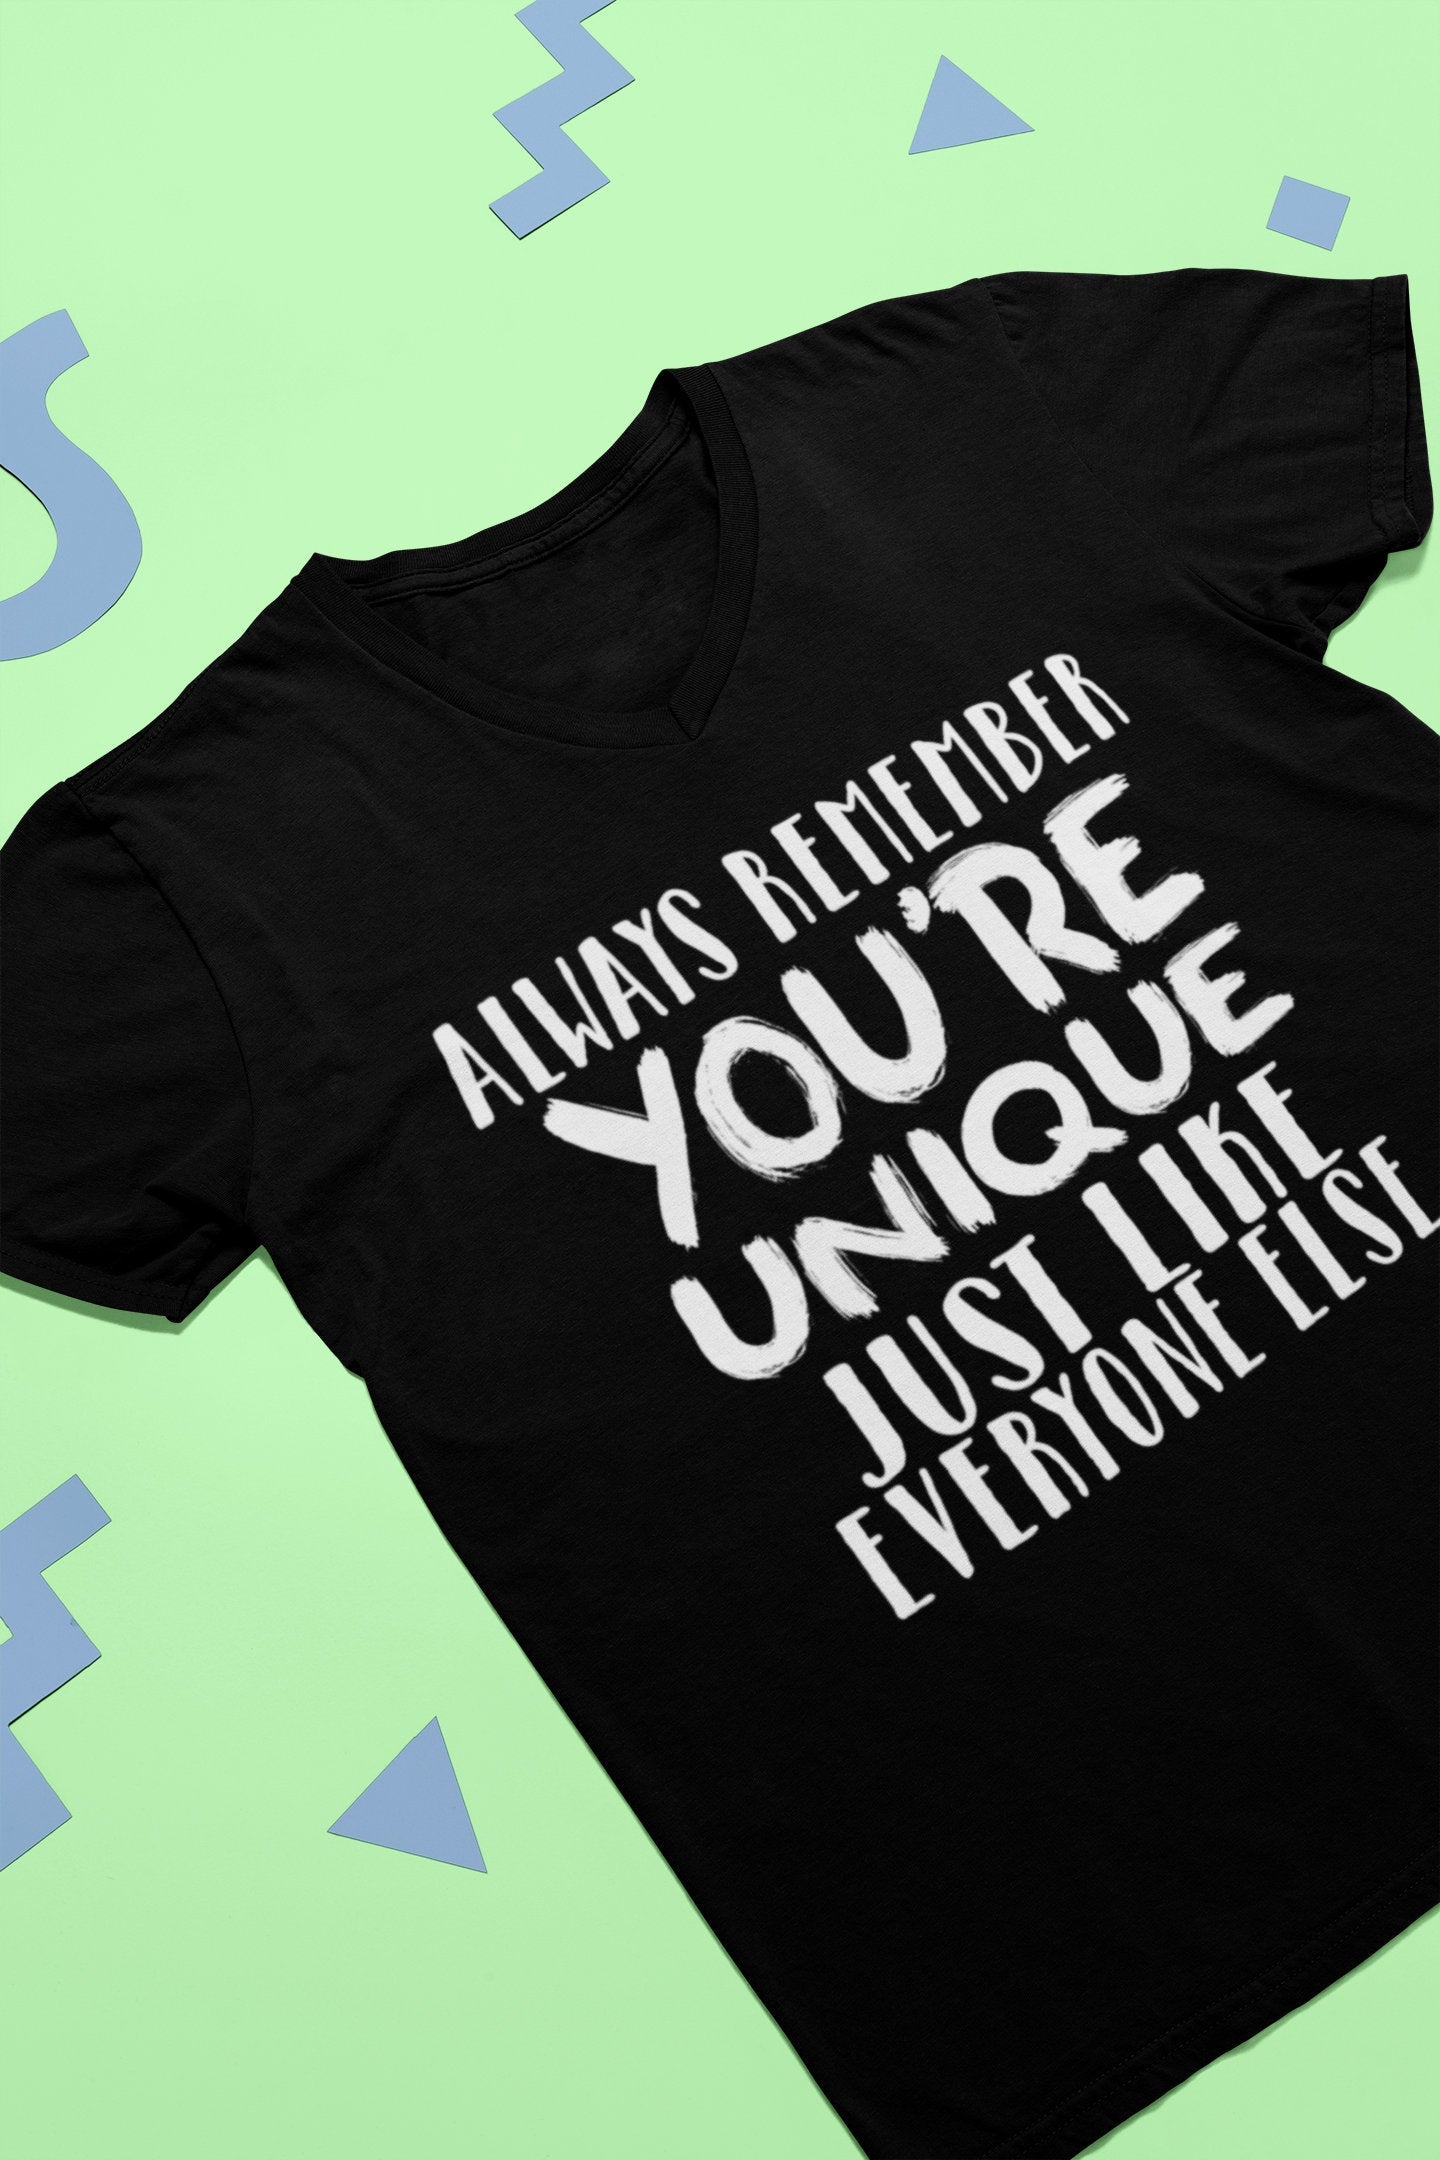 Always Remember You're Unique Just Like Everyone Else l Funny T-Shirt l Sarcasm Shirt